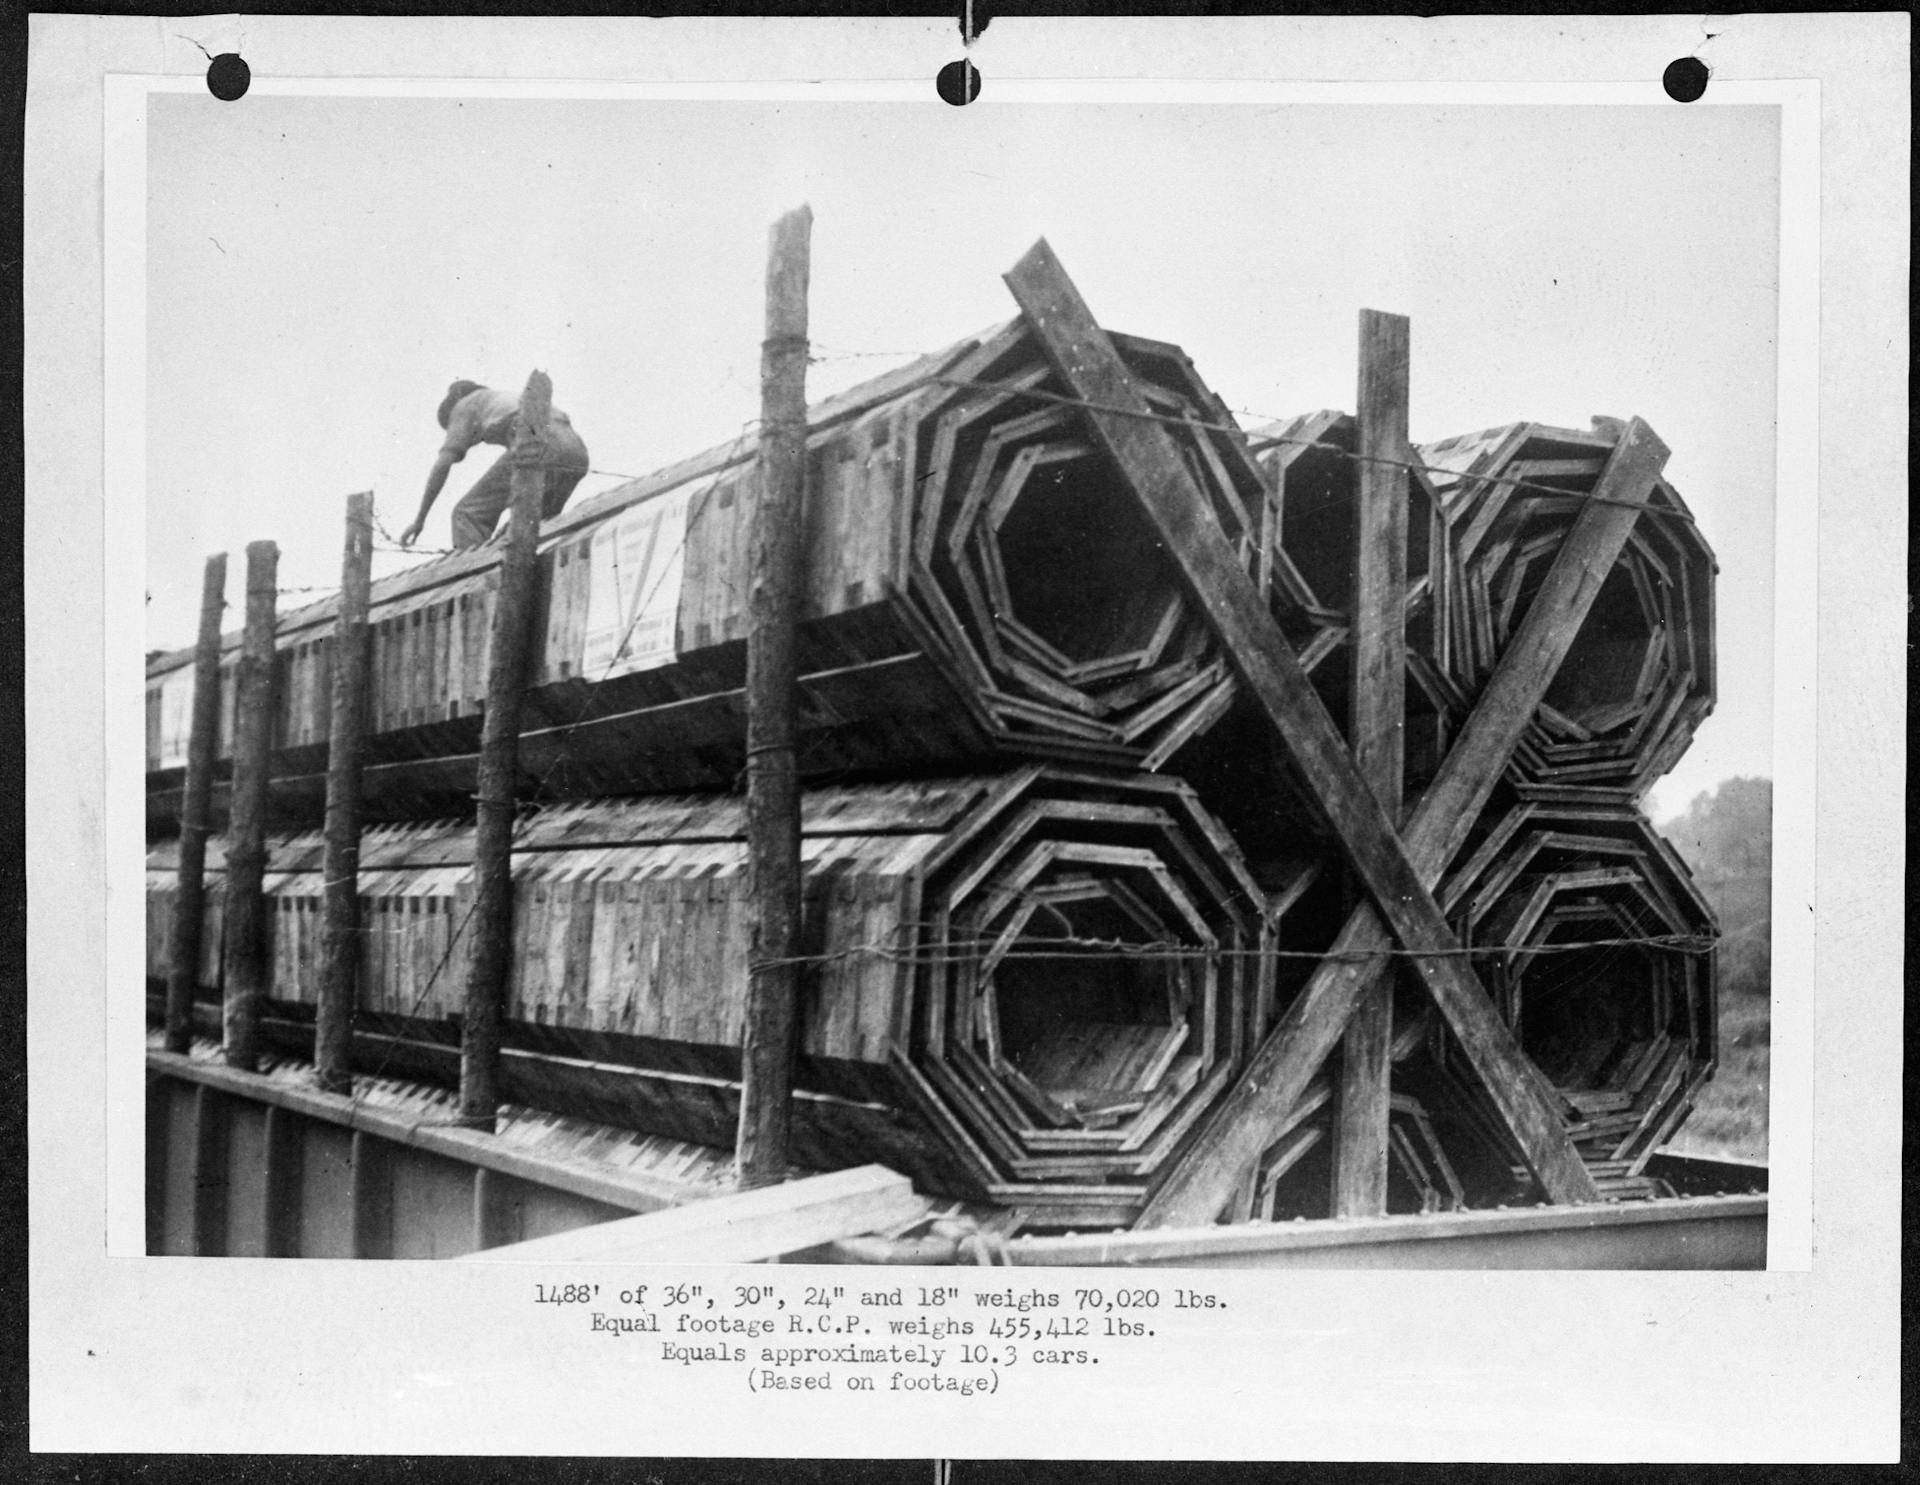 Substitute materials. A shipment of 1,488 feet of 18-inch, 24-inch, 30-inch and 36-inch wooden pipe on one flat car. Weight 70,020 pounds. An equal footage of reinforced concrete pipe weighs 455,412 pounds, requires over ten cars. These pipes,… 